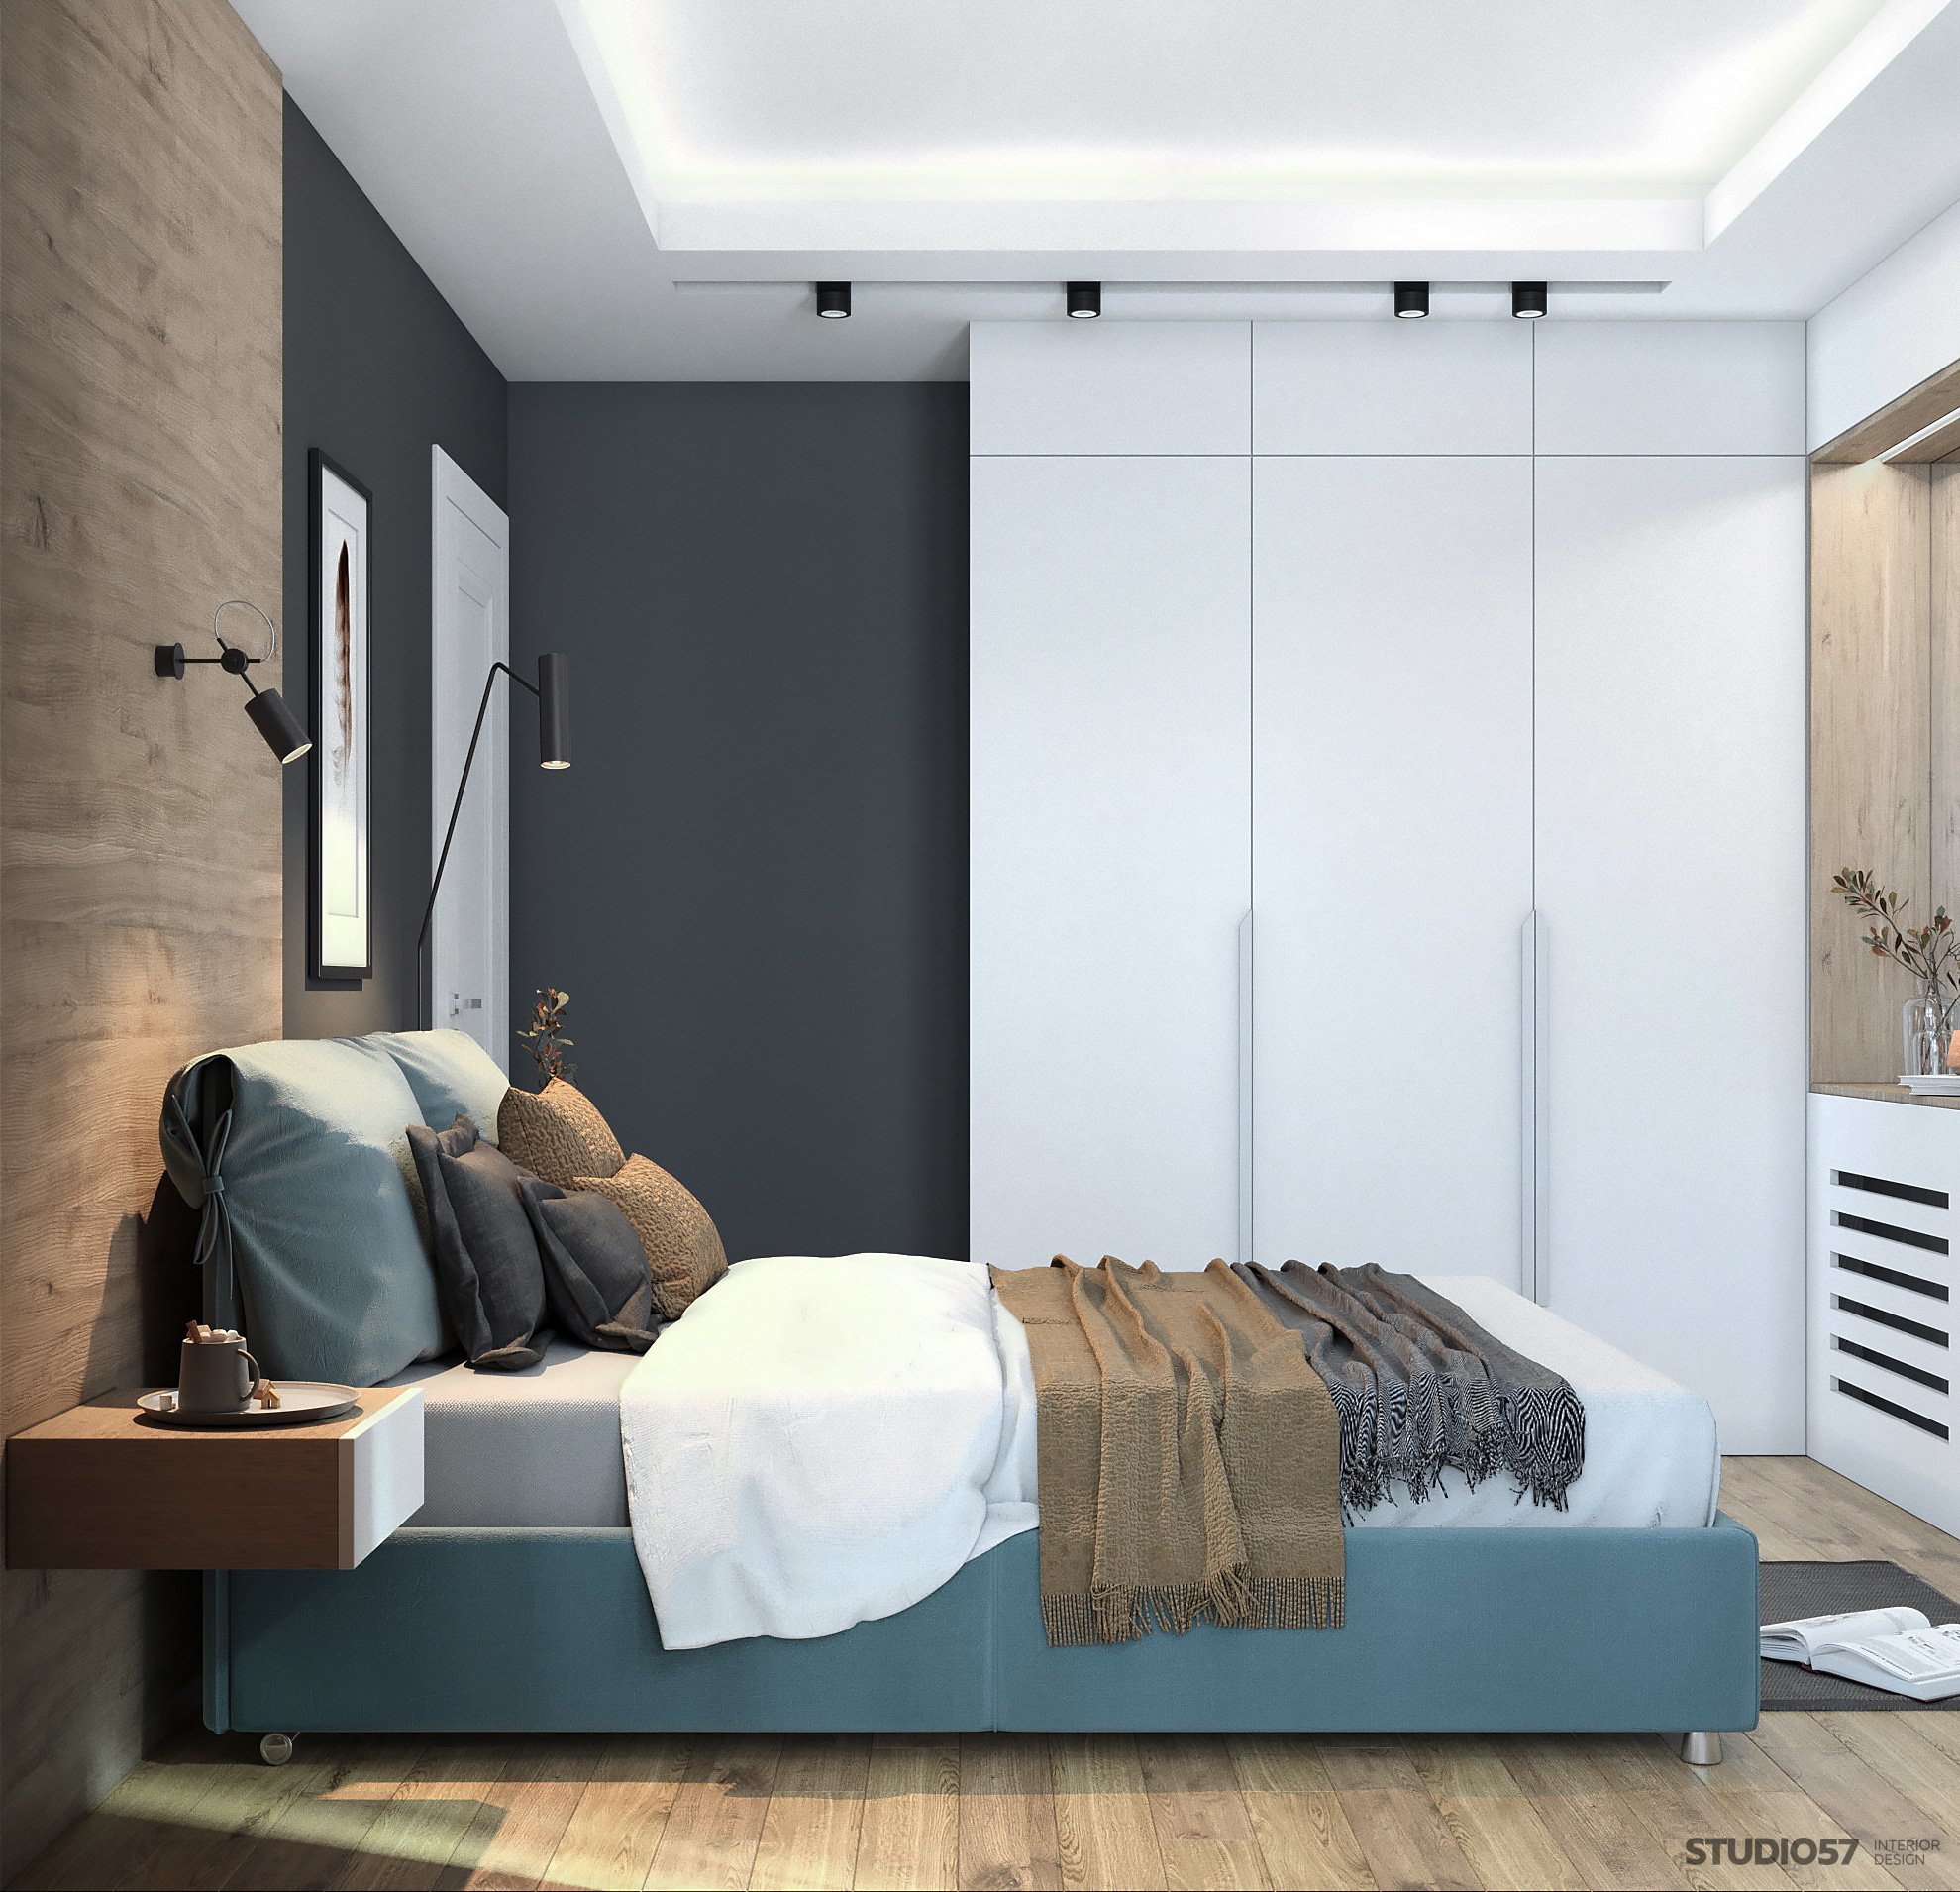 Interior bedroom in a modern style image